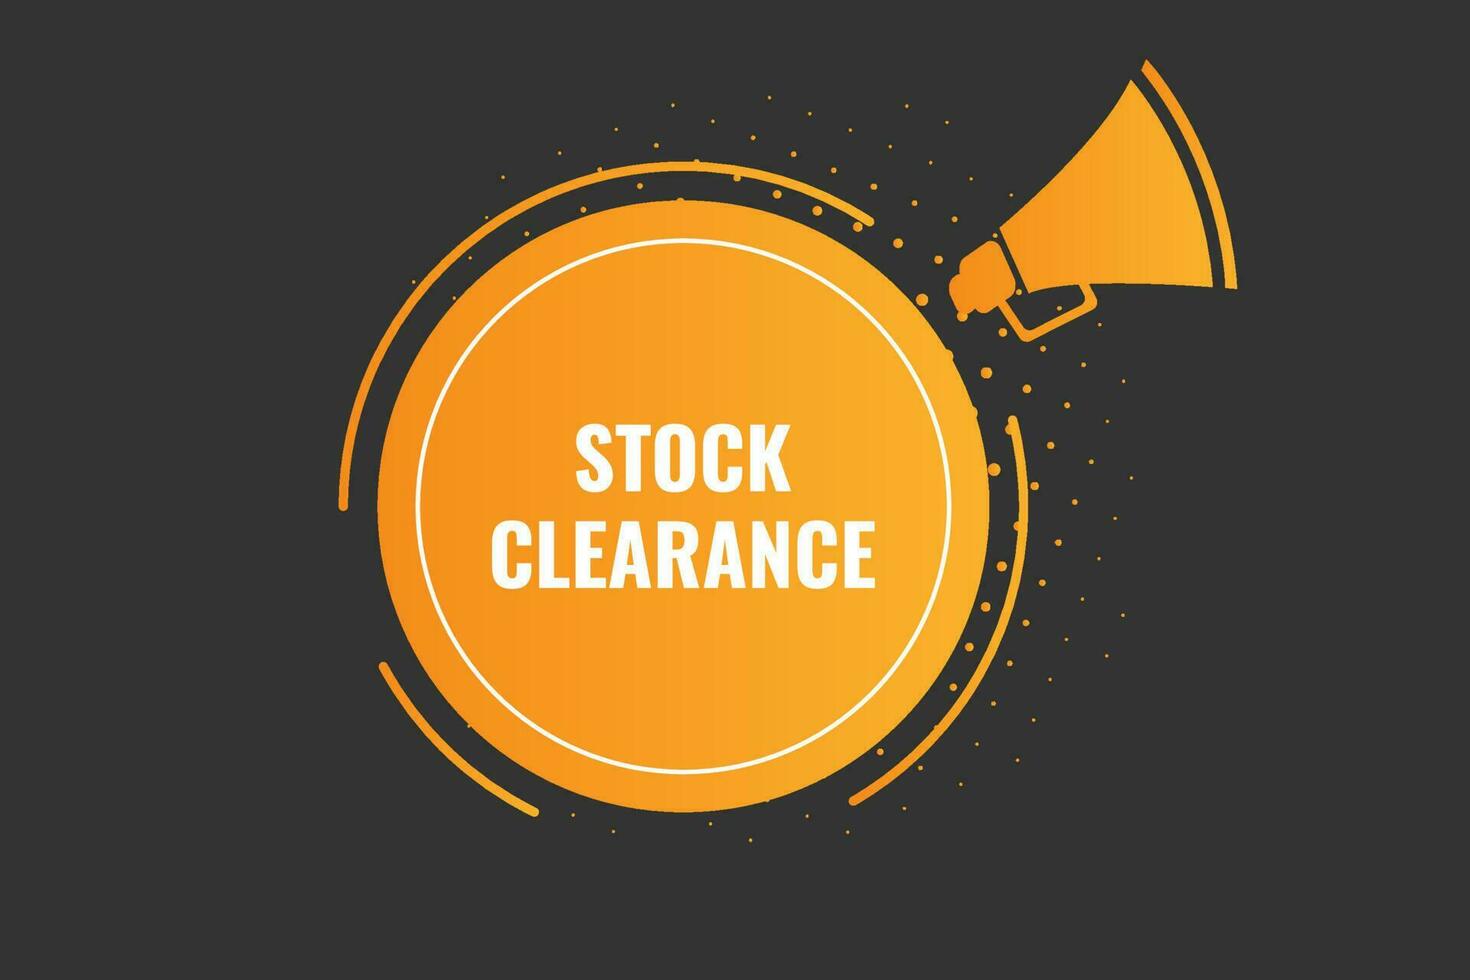 Stock Clearance Button. Speech Bubble, Banner Label Stock Clearance vector